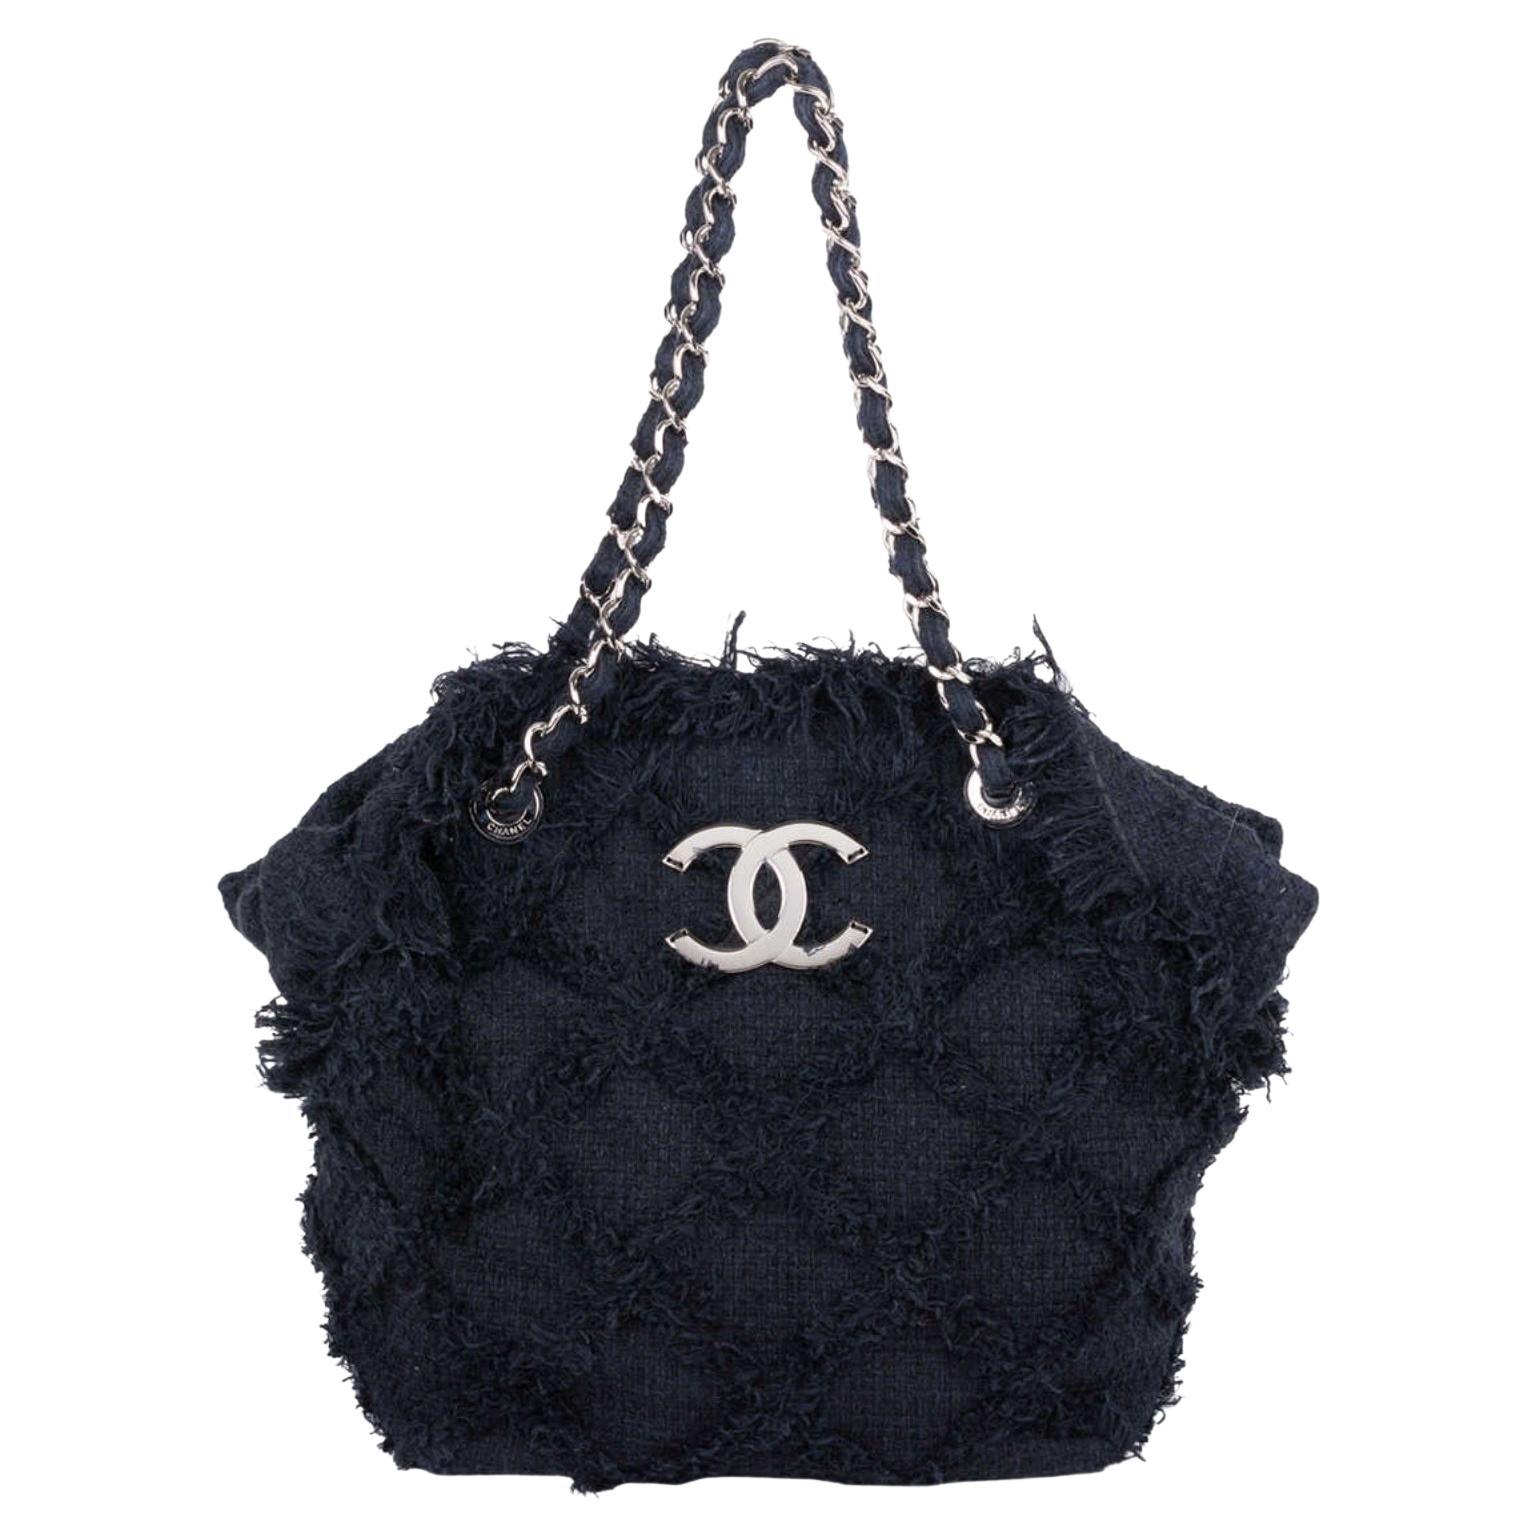 Sold at Auction: Chanel Coco chanel egg bag (limited edition)